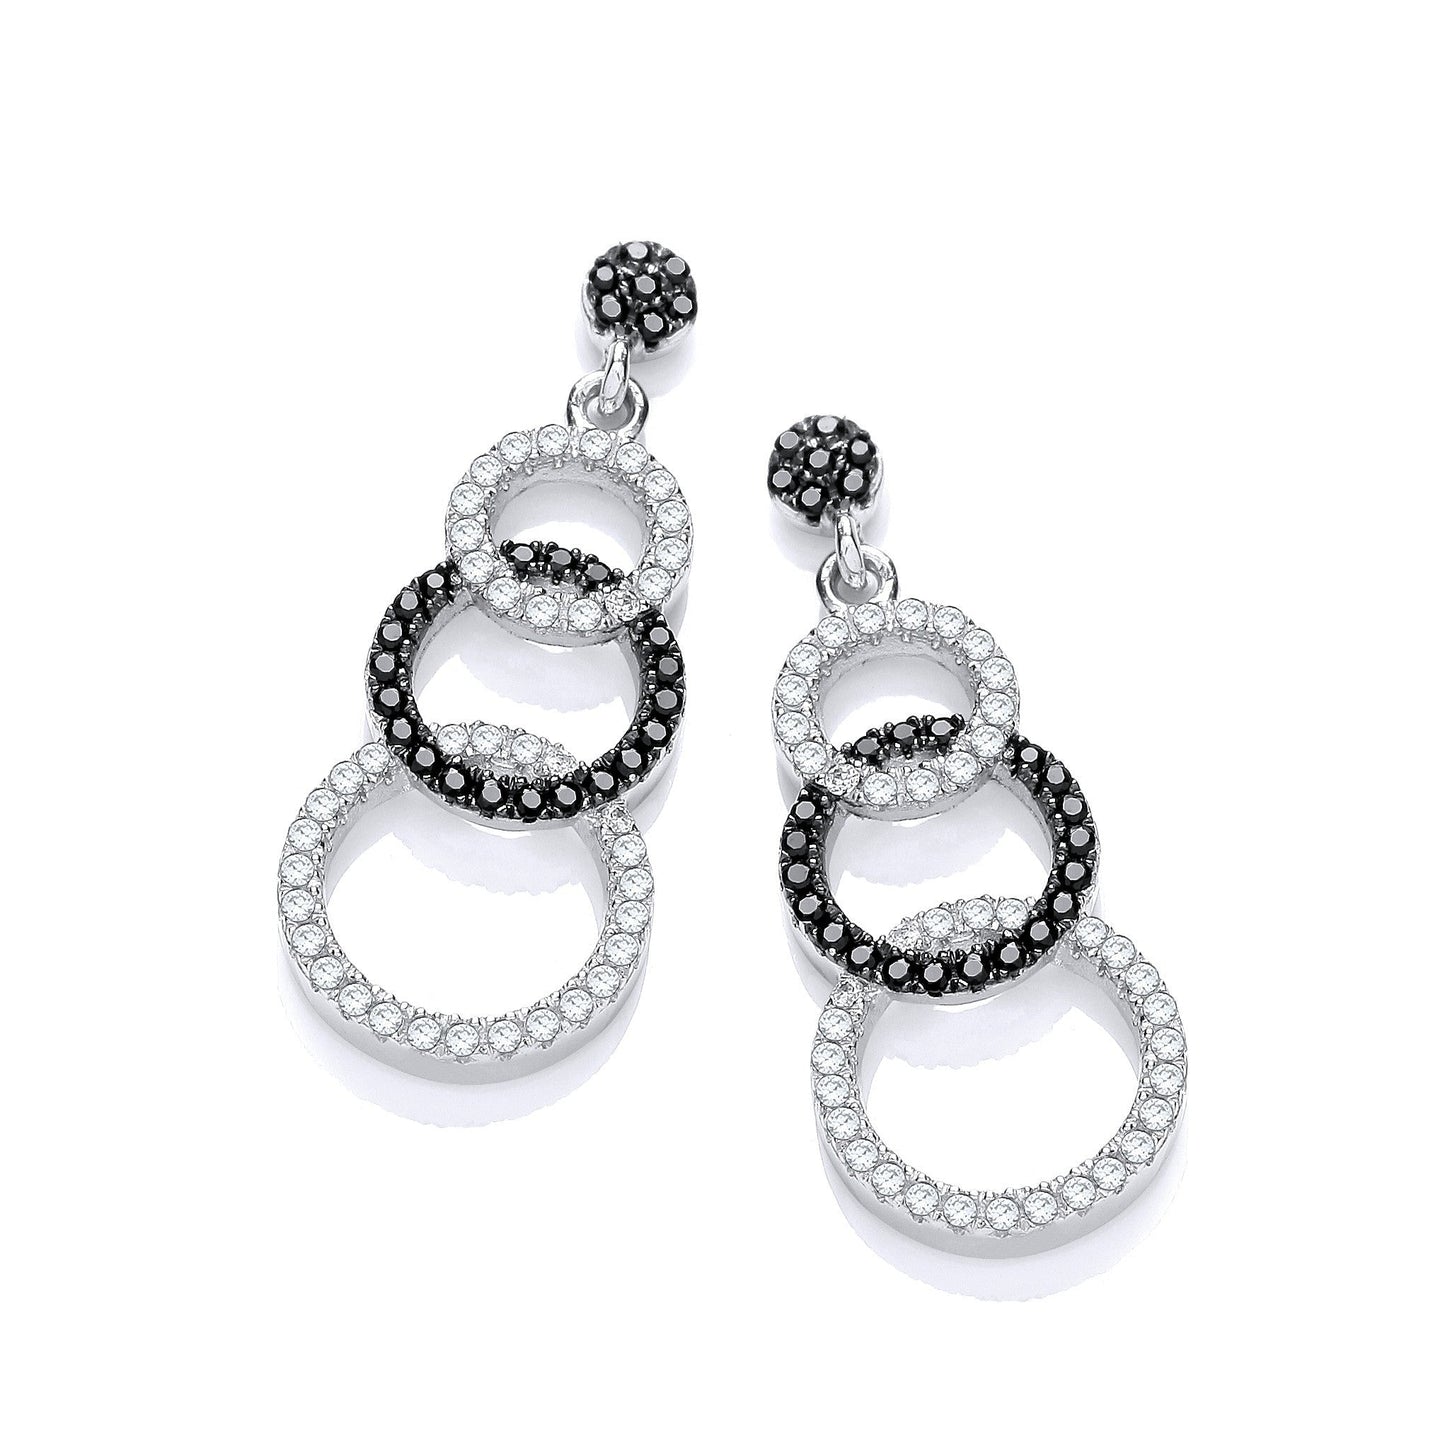 Circle Drop 925 Sterling Silver Earrings Set With CZs - FJewellery